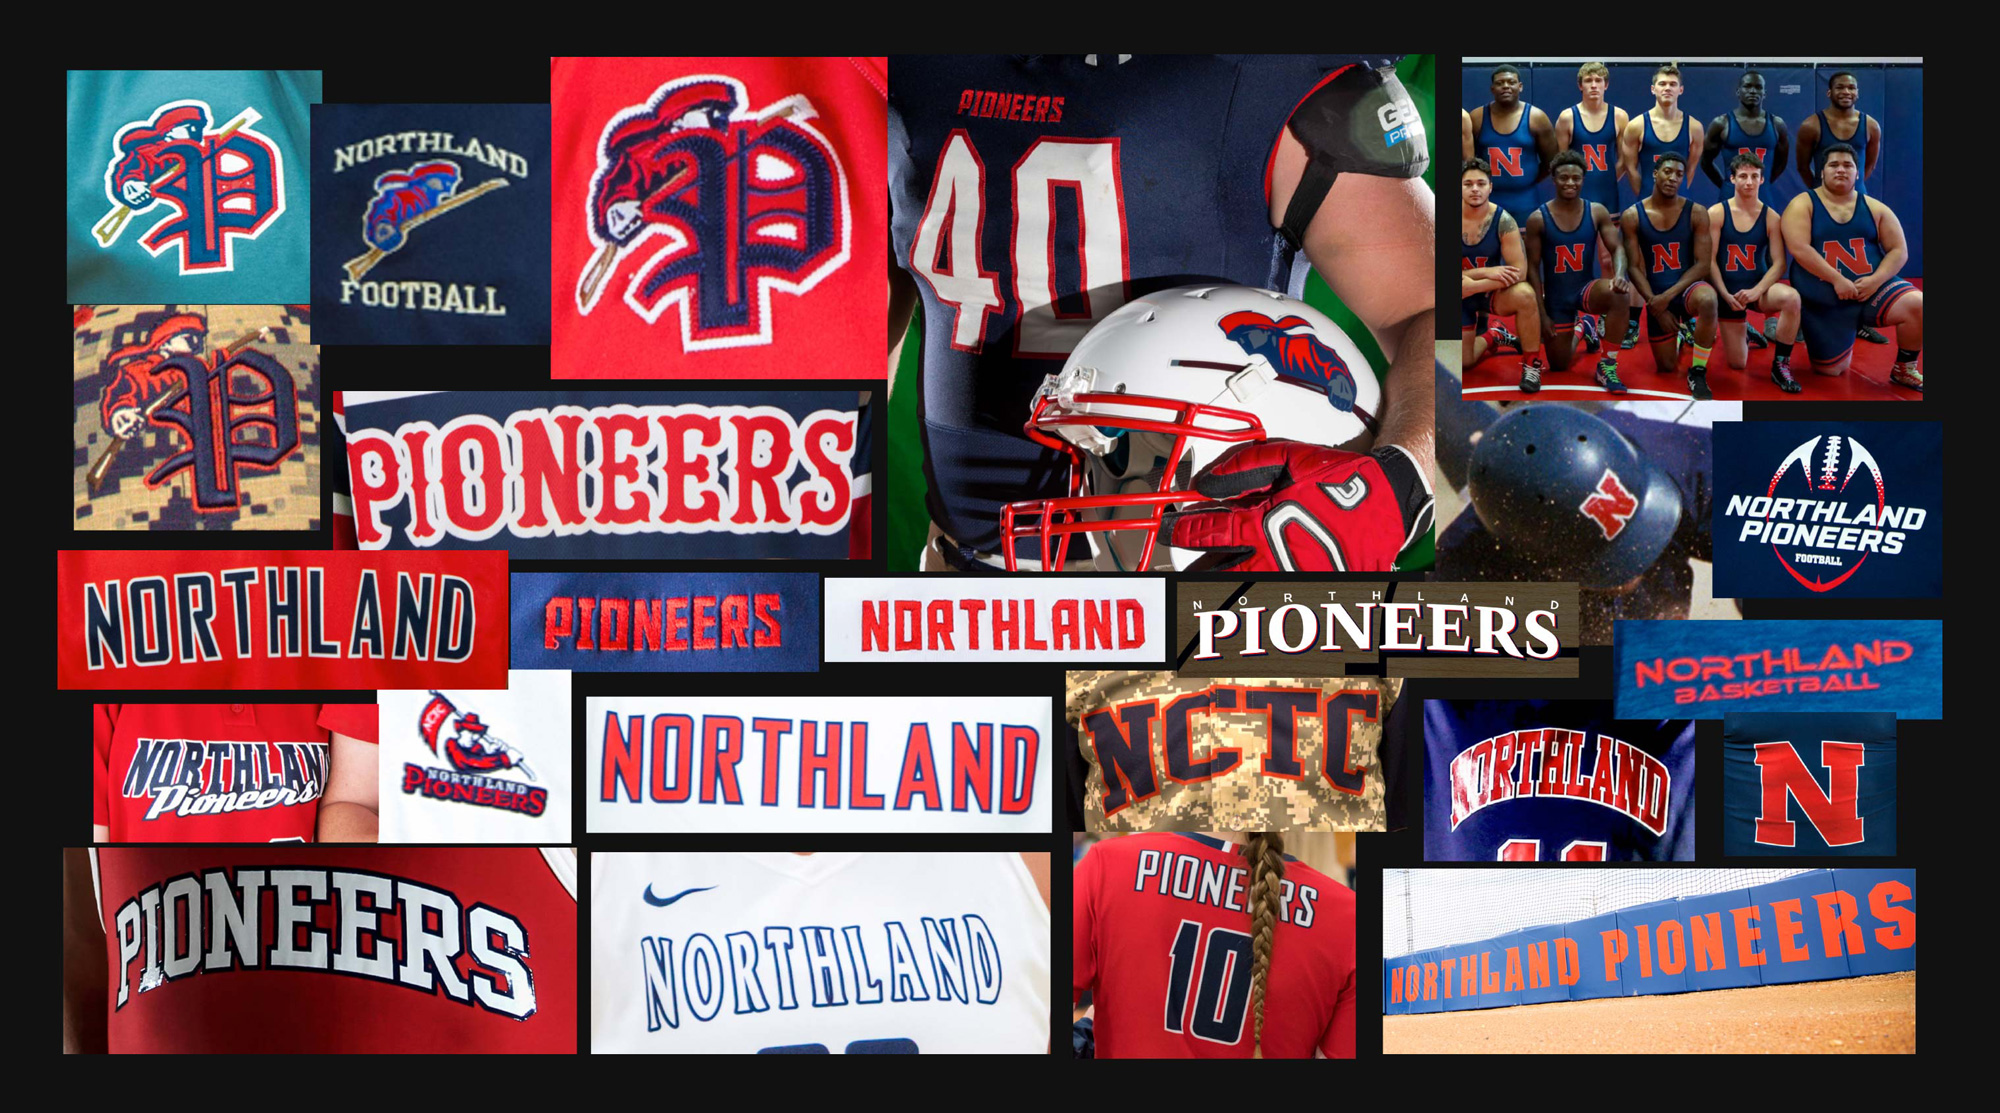 New Logo and Identity for Northland Community College and Northland Pioneers by Object